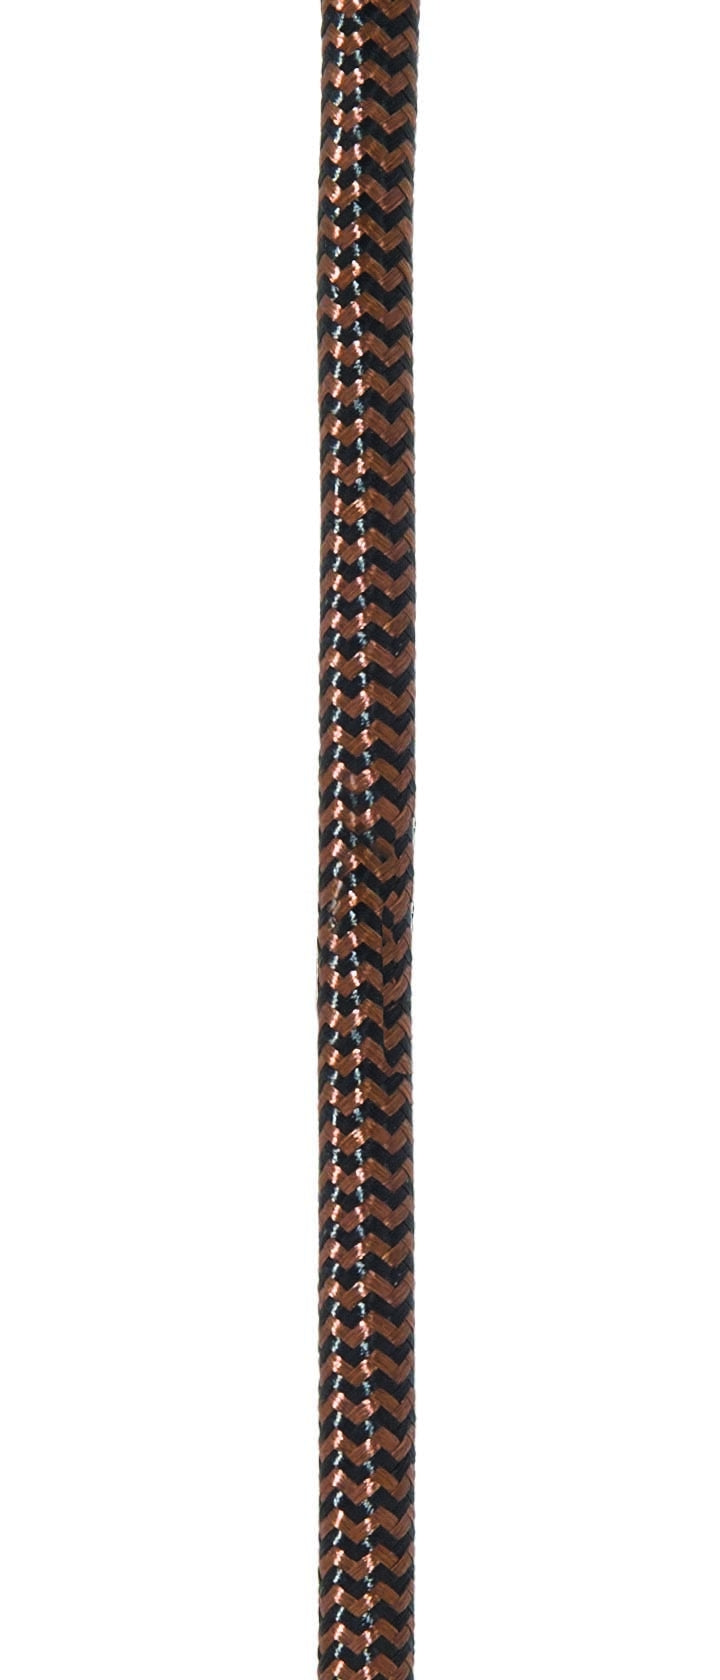 18/3 SVT-B Black and Brown Hounds-tooth Pattern Rayon Covered Parallel Fabric Lamp Cord - Choice of Length 